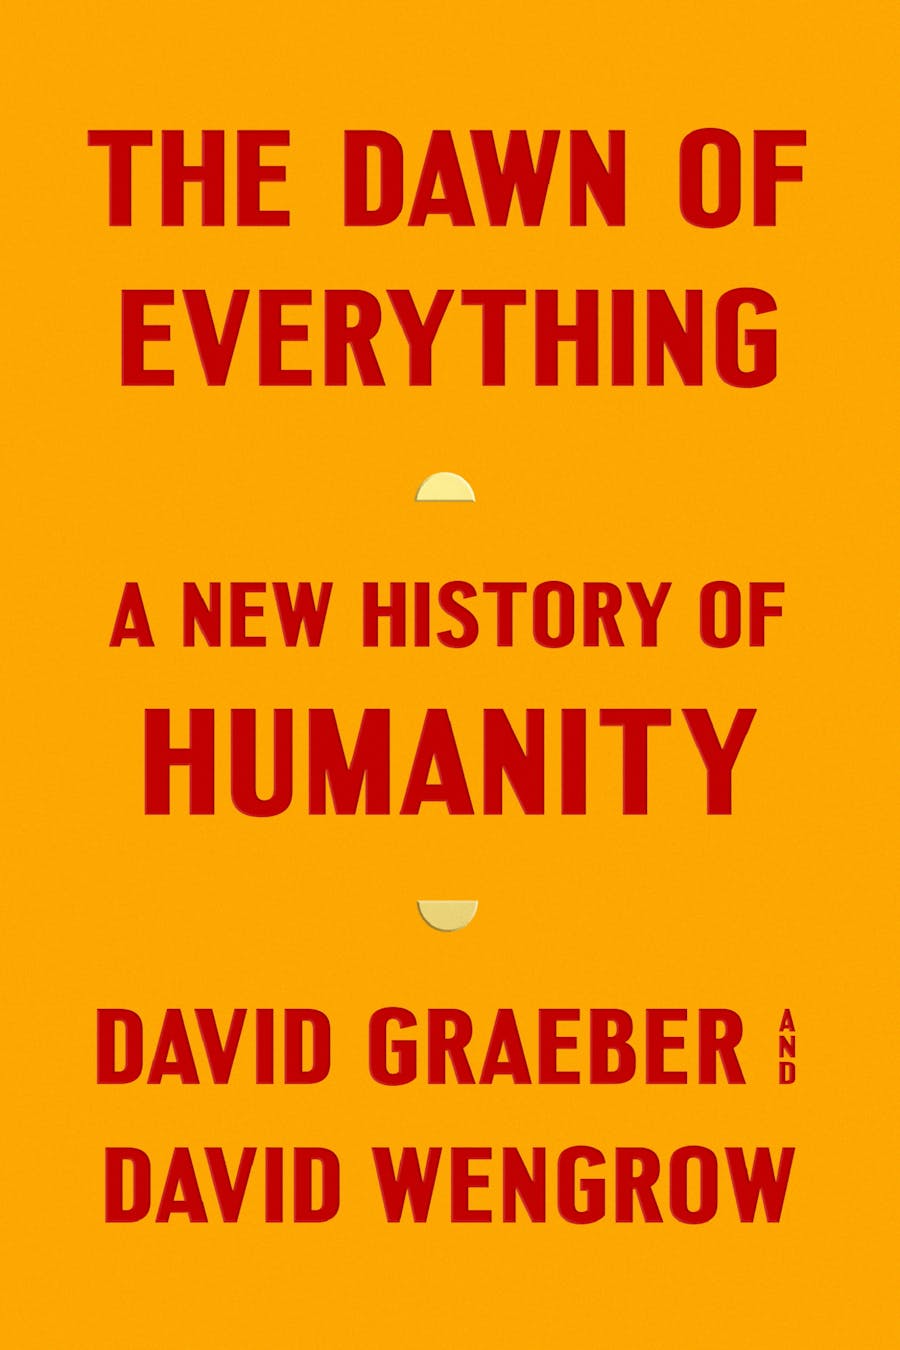 The Dawn of Everything: A New History of Humanity by David Graeber & David Wengrow